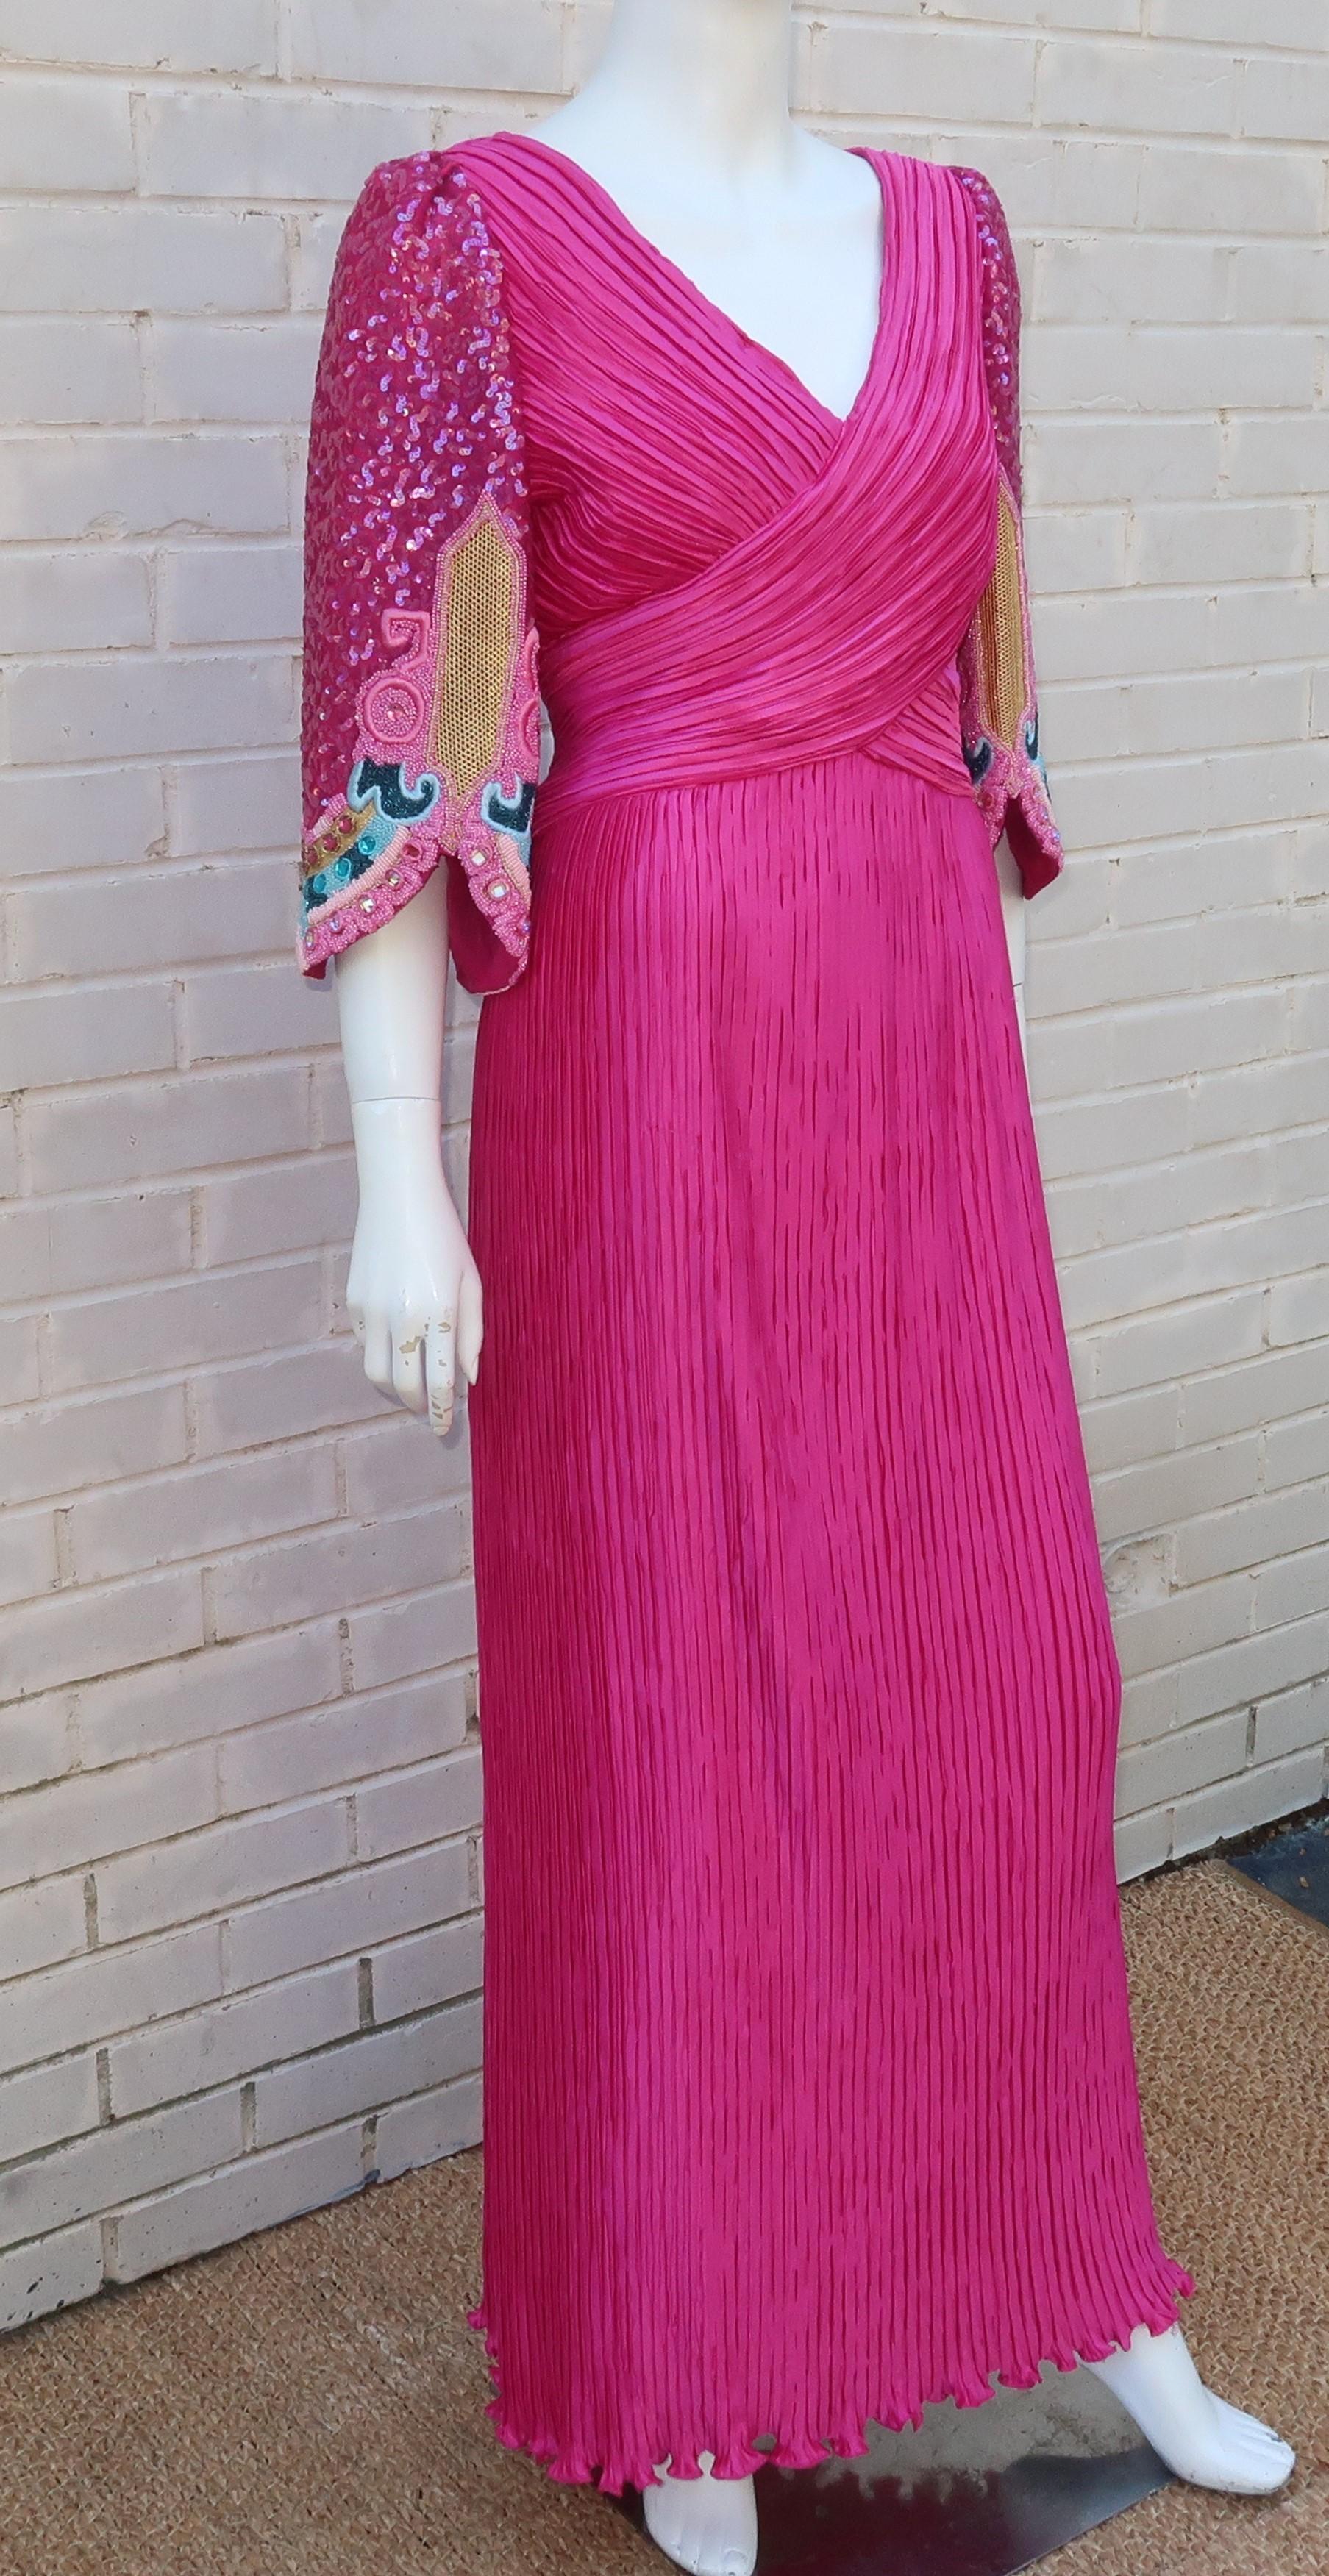 The bright fuchsia color of this 1980’s Richilene evening dress is captivating though the phenomenal bead work on the sleeves is the real show stopper.  Beautifully made with a micro pleat fabric reminiscent of Mary McFadden or Mario Fortuny, the